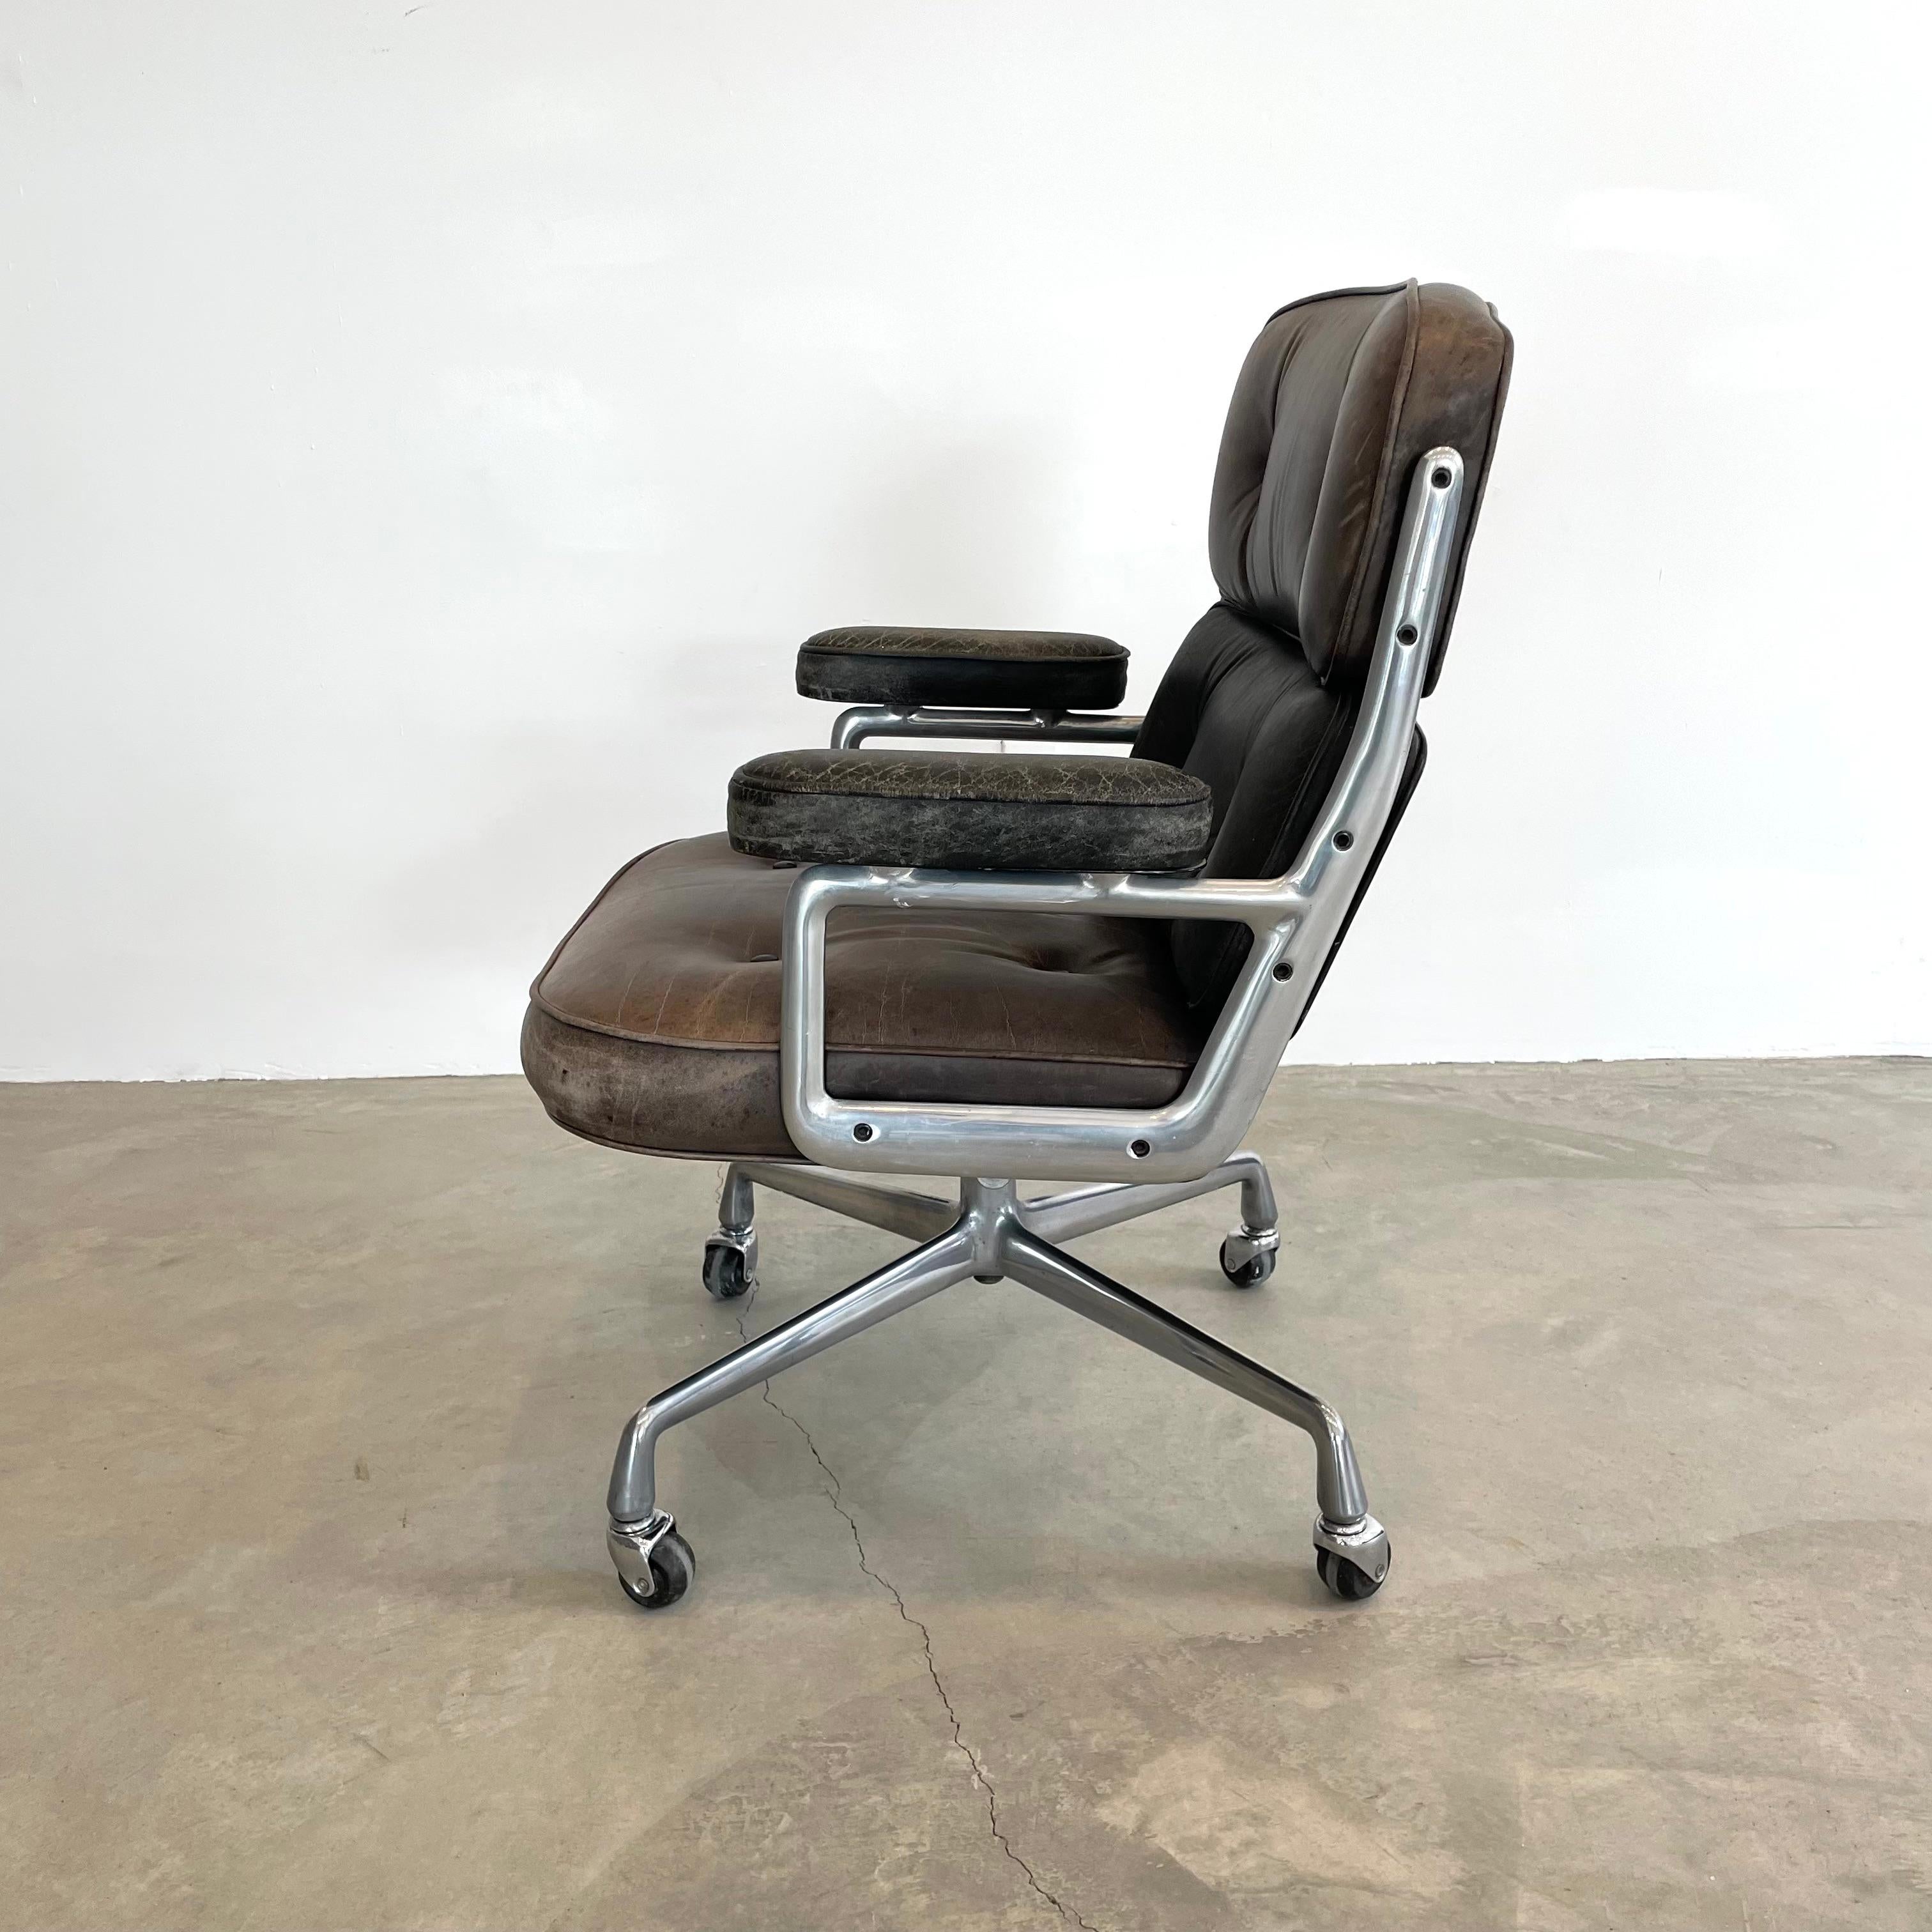 American Eames Time Life Chair in Brown and Black Leather for Herman Miller, 1984 USA